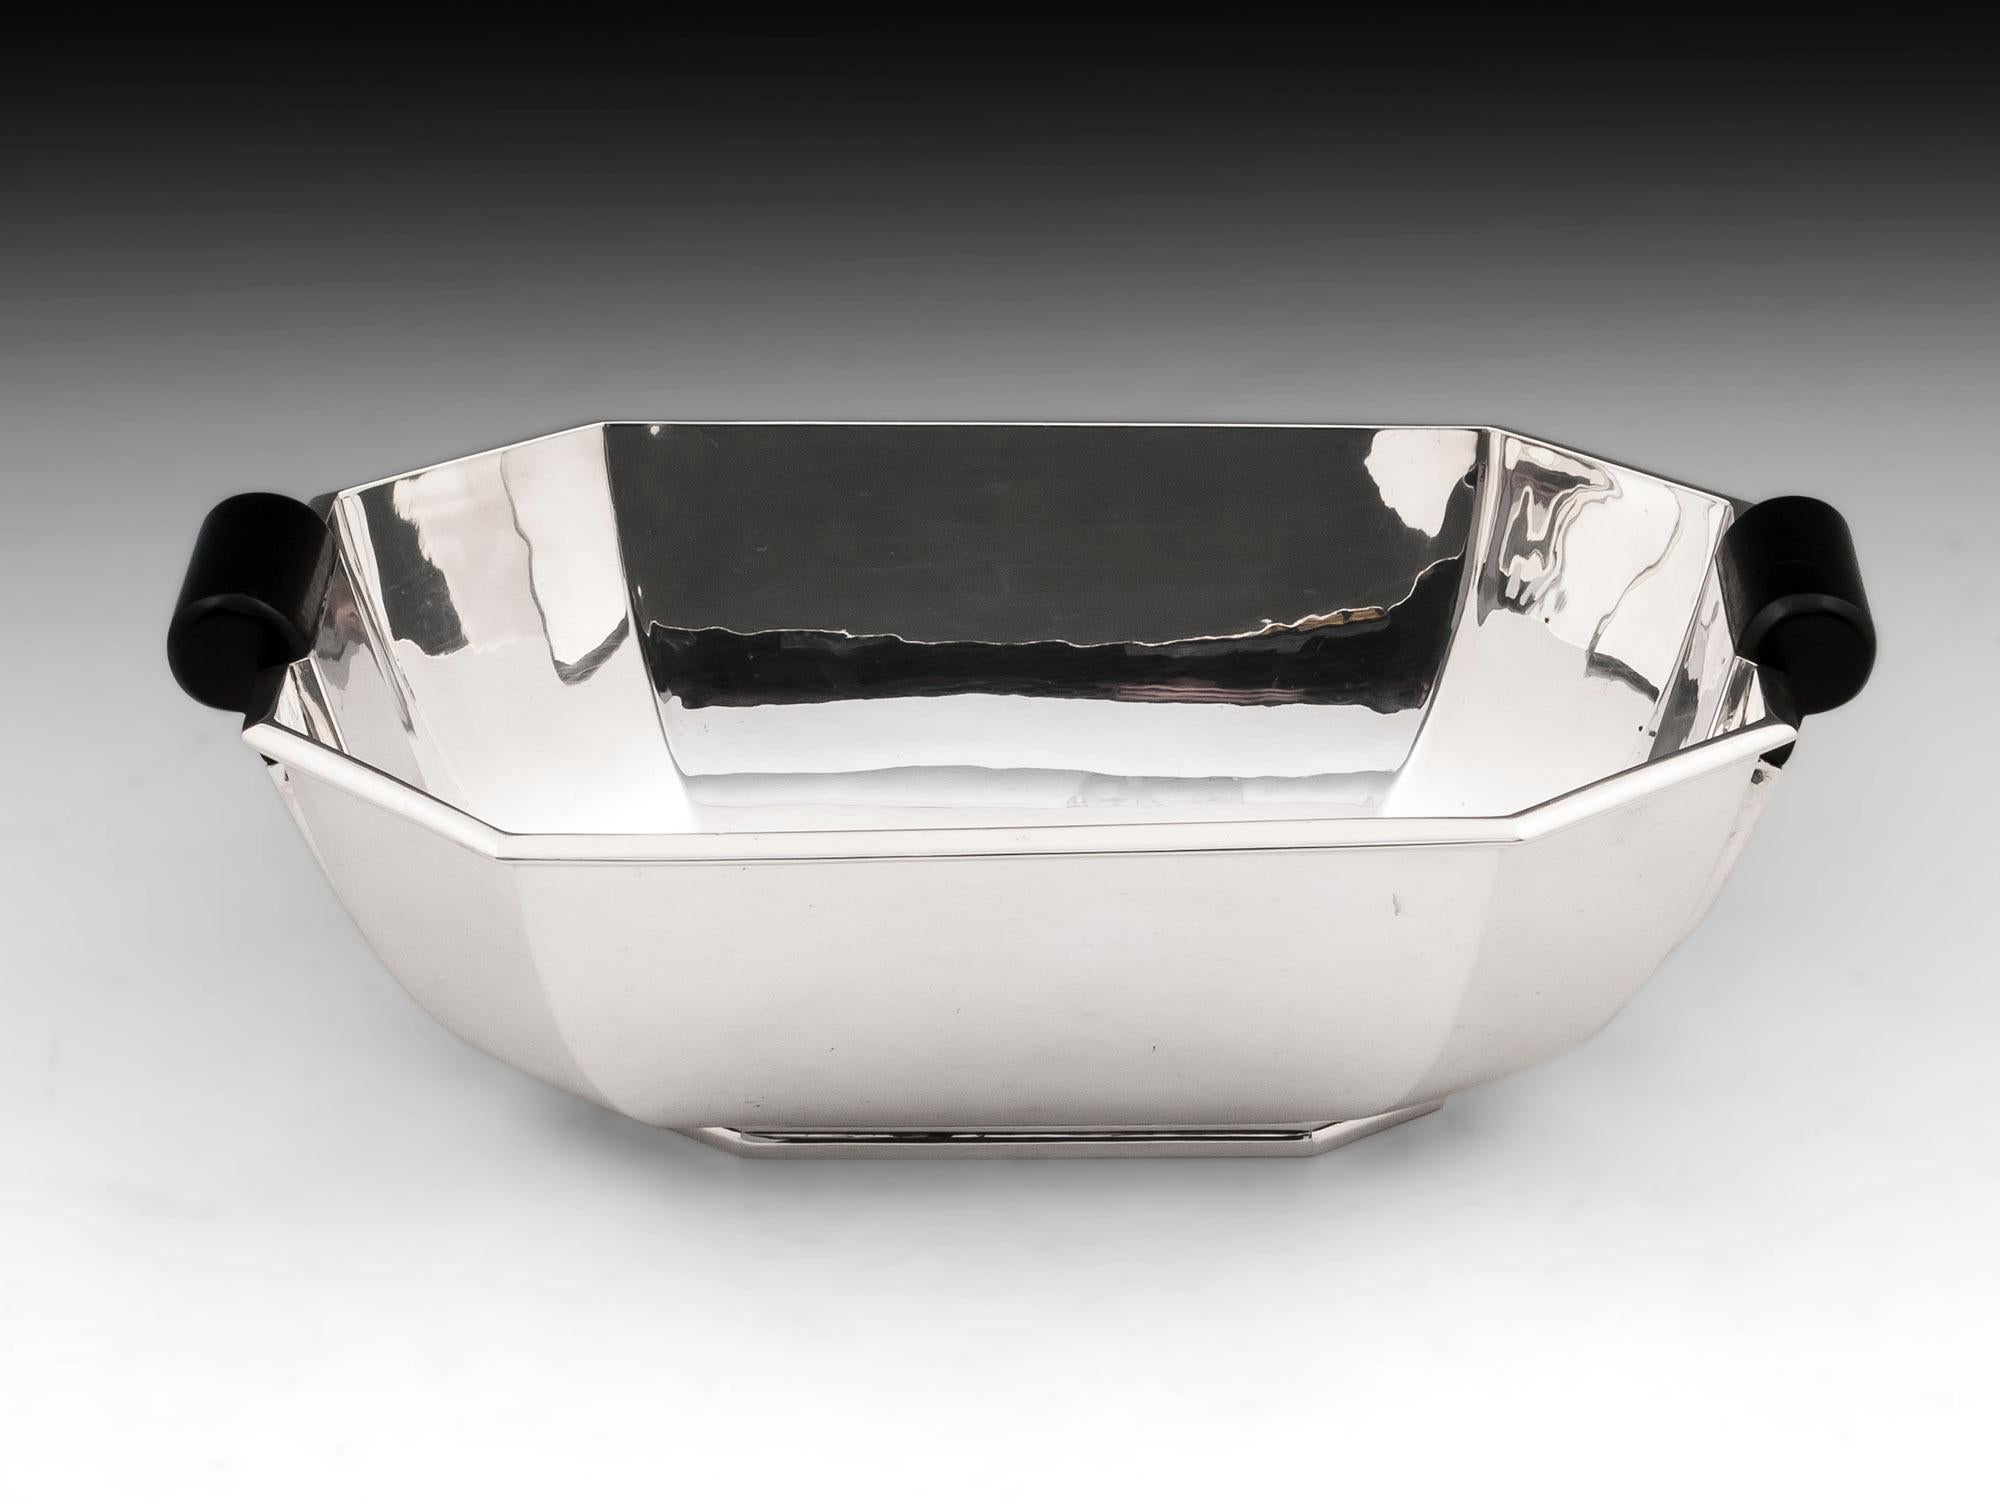 Art Deco sterling silver bowl with ebony handles by London silversmiths William Comyns & Sons Ltd.